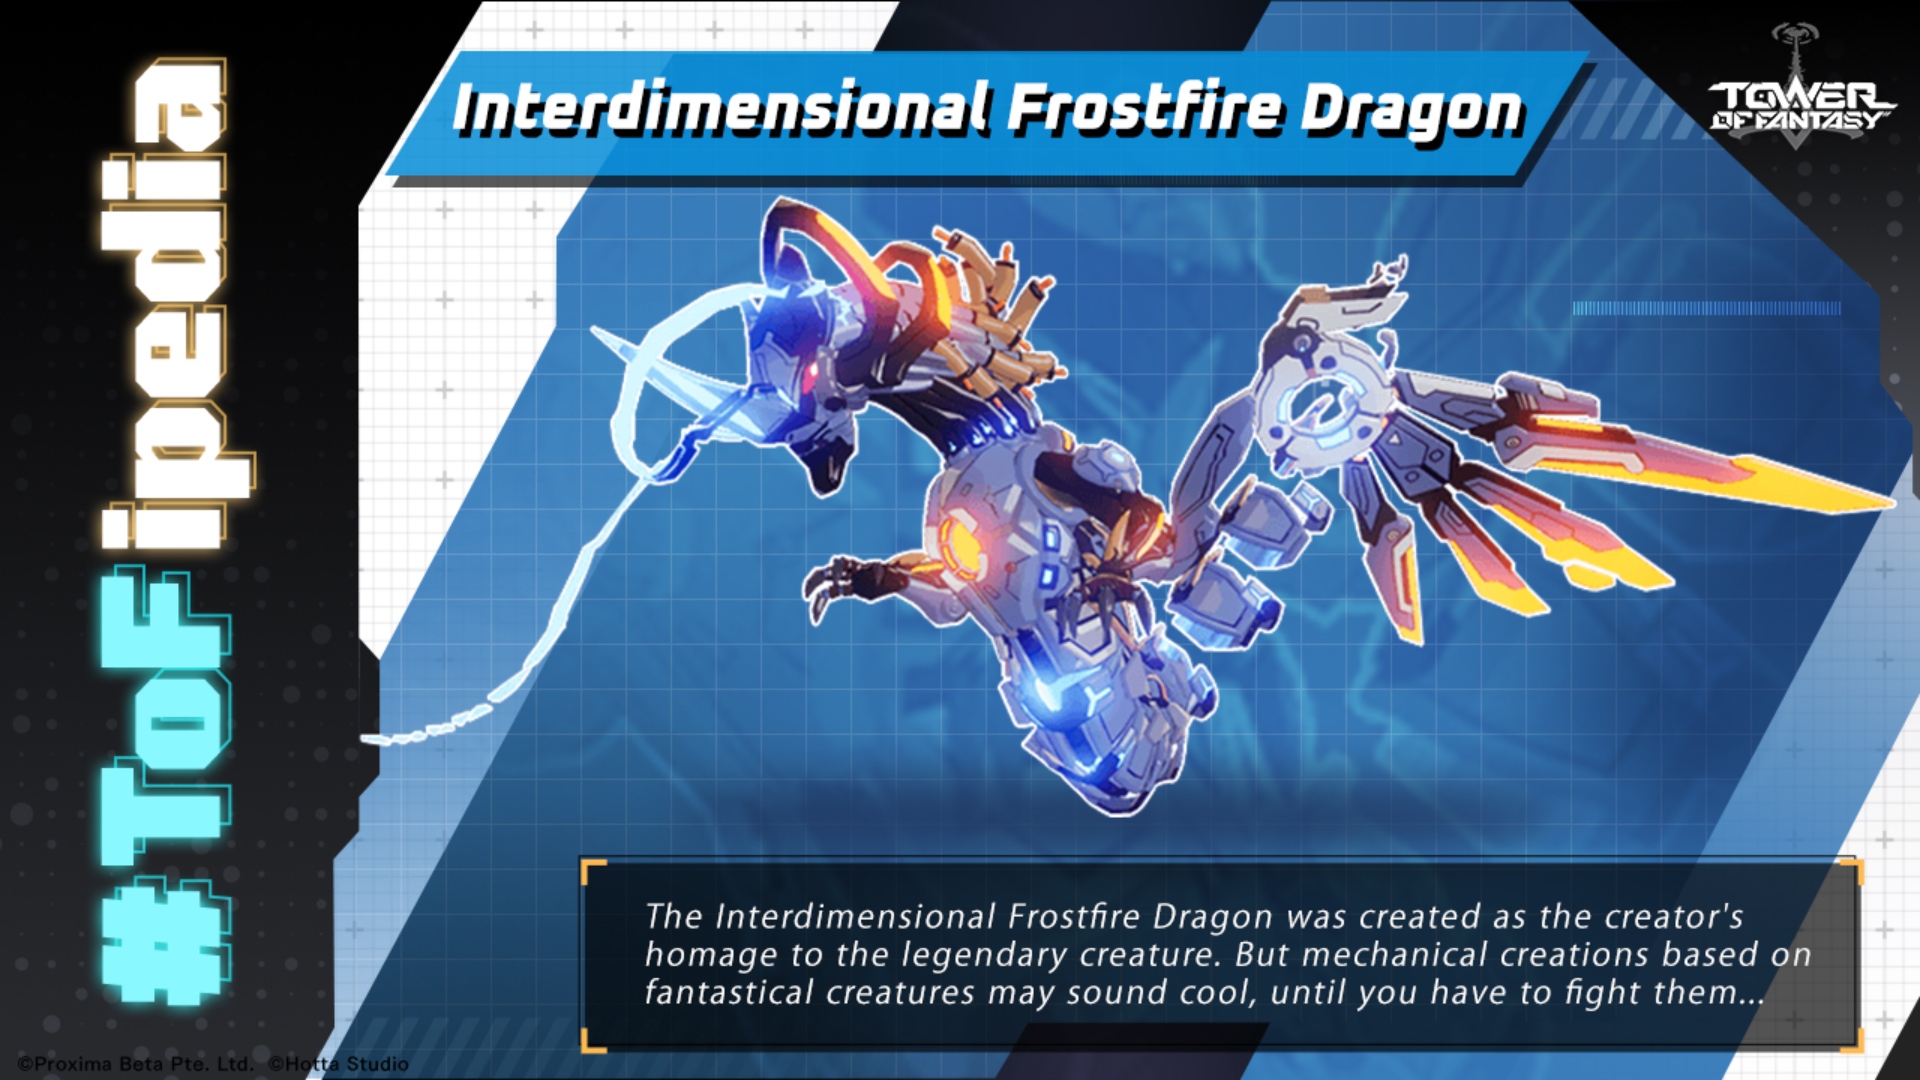 Best dragon games: Tower of Fantasy. Image shows a robotic dragon. To the top of the frame it says "Interdimensional Frostfire Dragon" and then to the bottom of the image it says "The Interdimensional Frostfire Dragon was created as the creator's homage to the legendary creature. But mechanical creations based on fantastical creatures may sound cool, until you have to fight them..." on the left of the image, it says "TOFipedia"